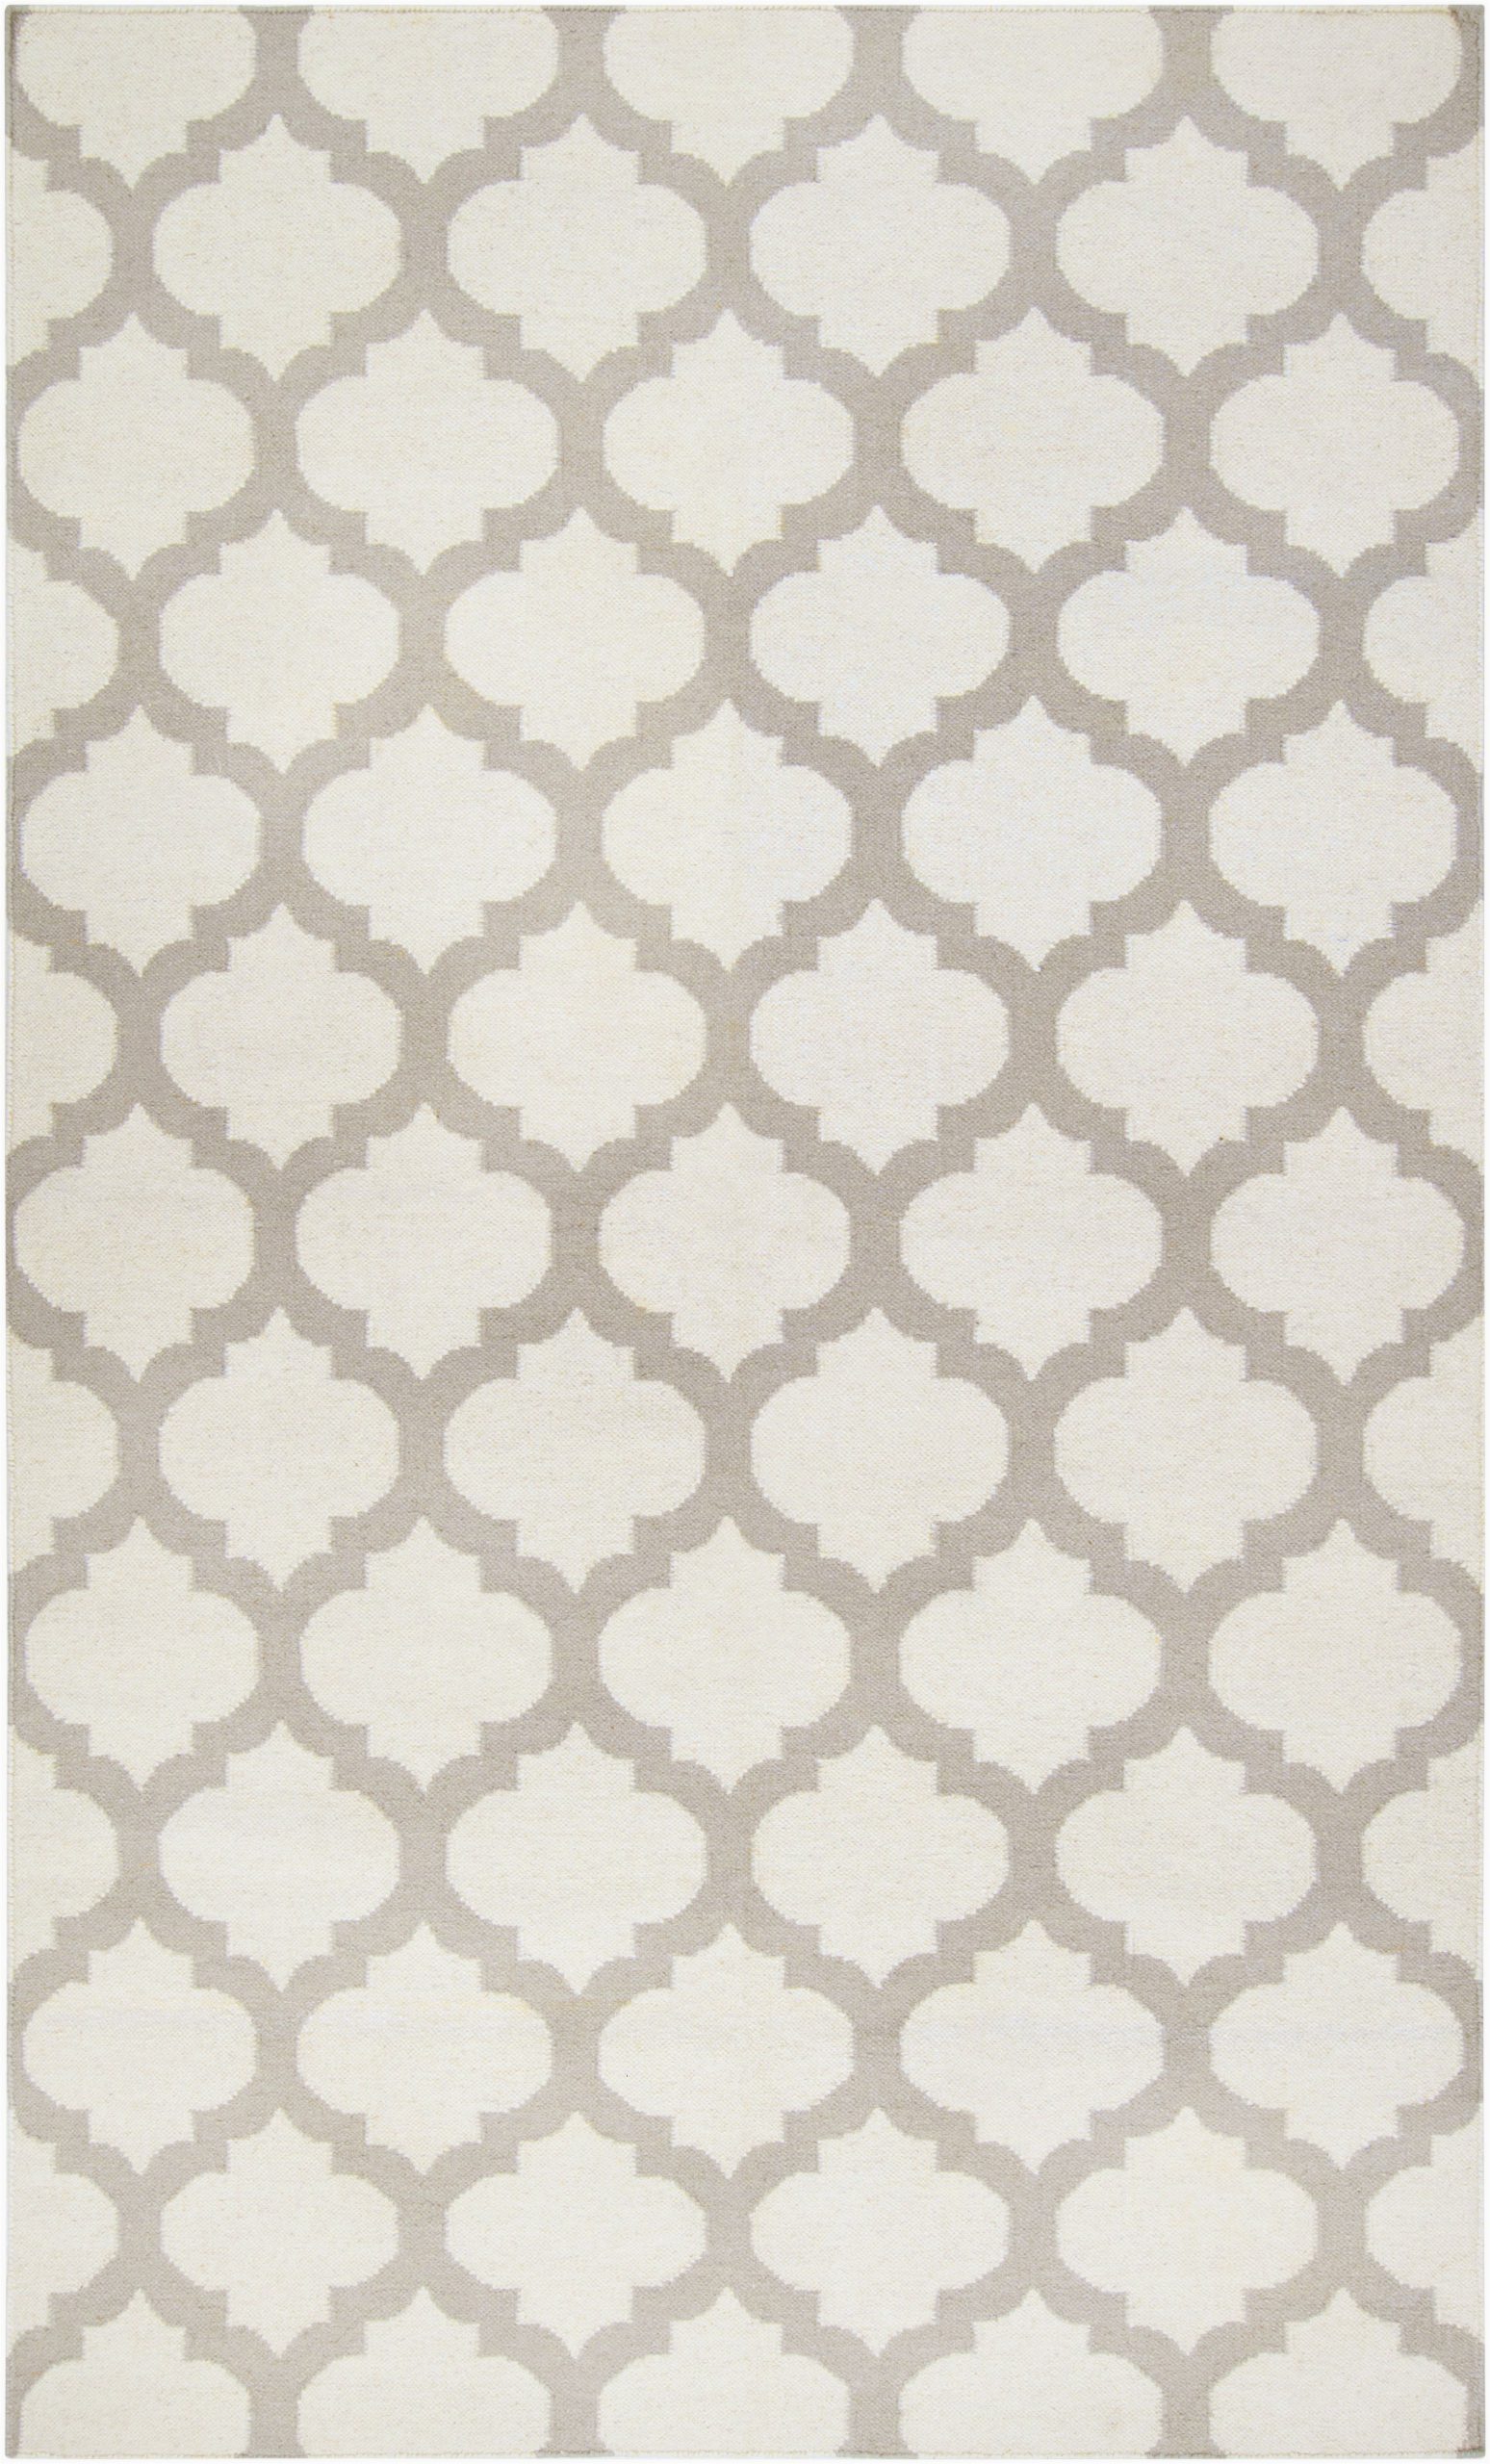 Grey Tan and White area Rug Frontier White and Grey Trellis Print Rug